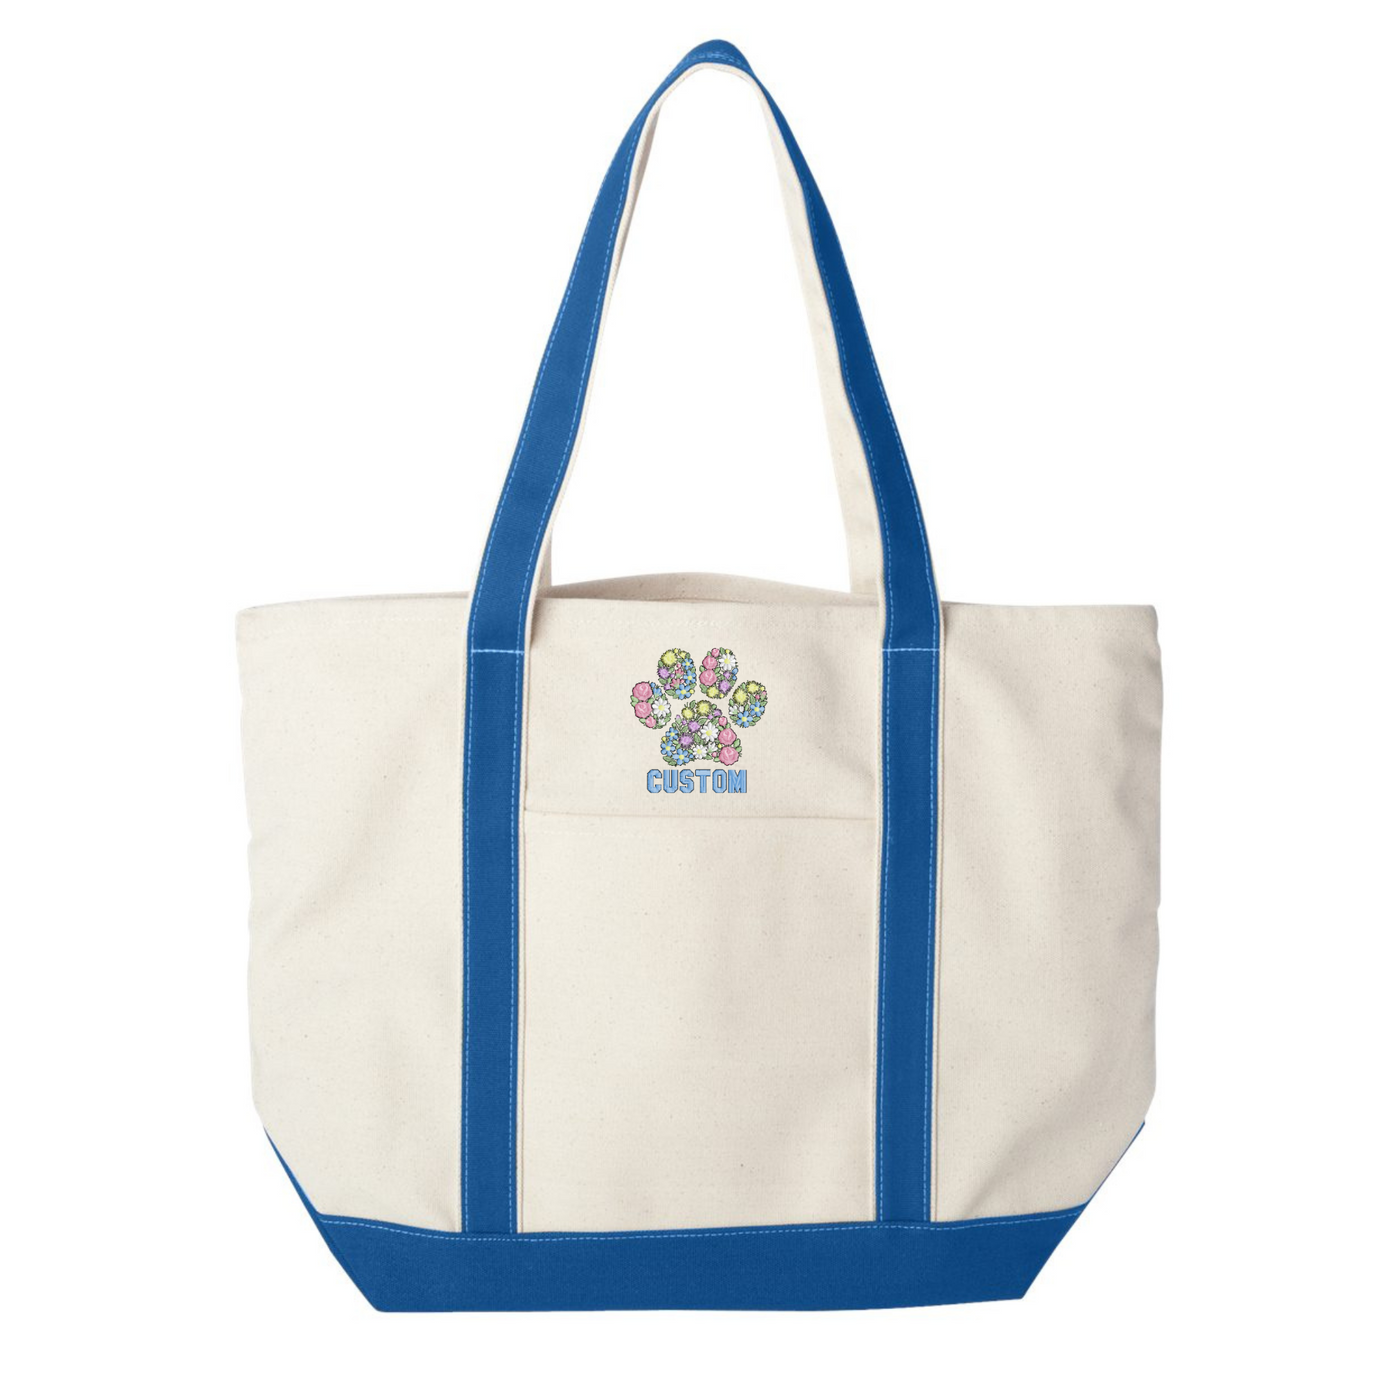 Make It Yours™ 'Floral Paw Print' Canvas Boat Tote